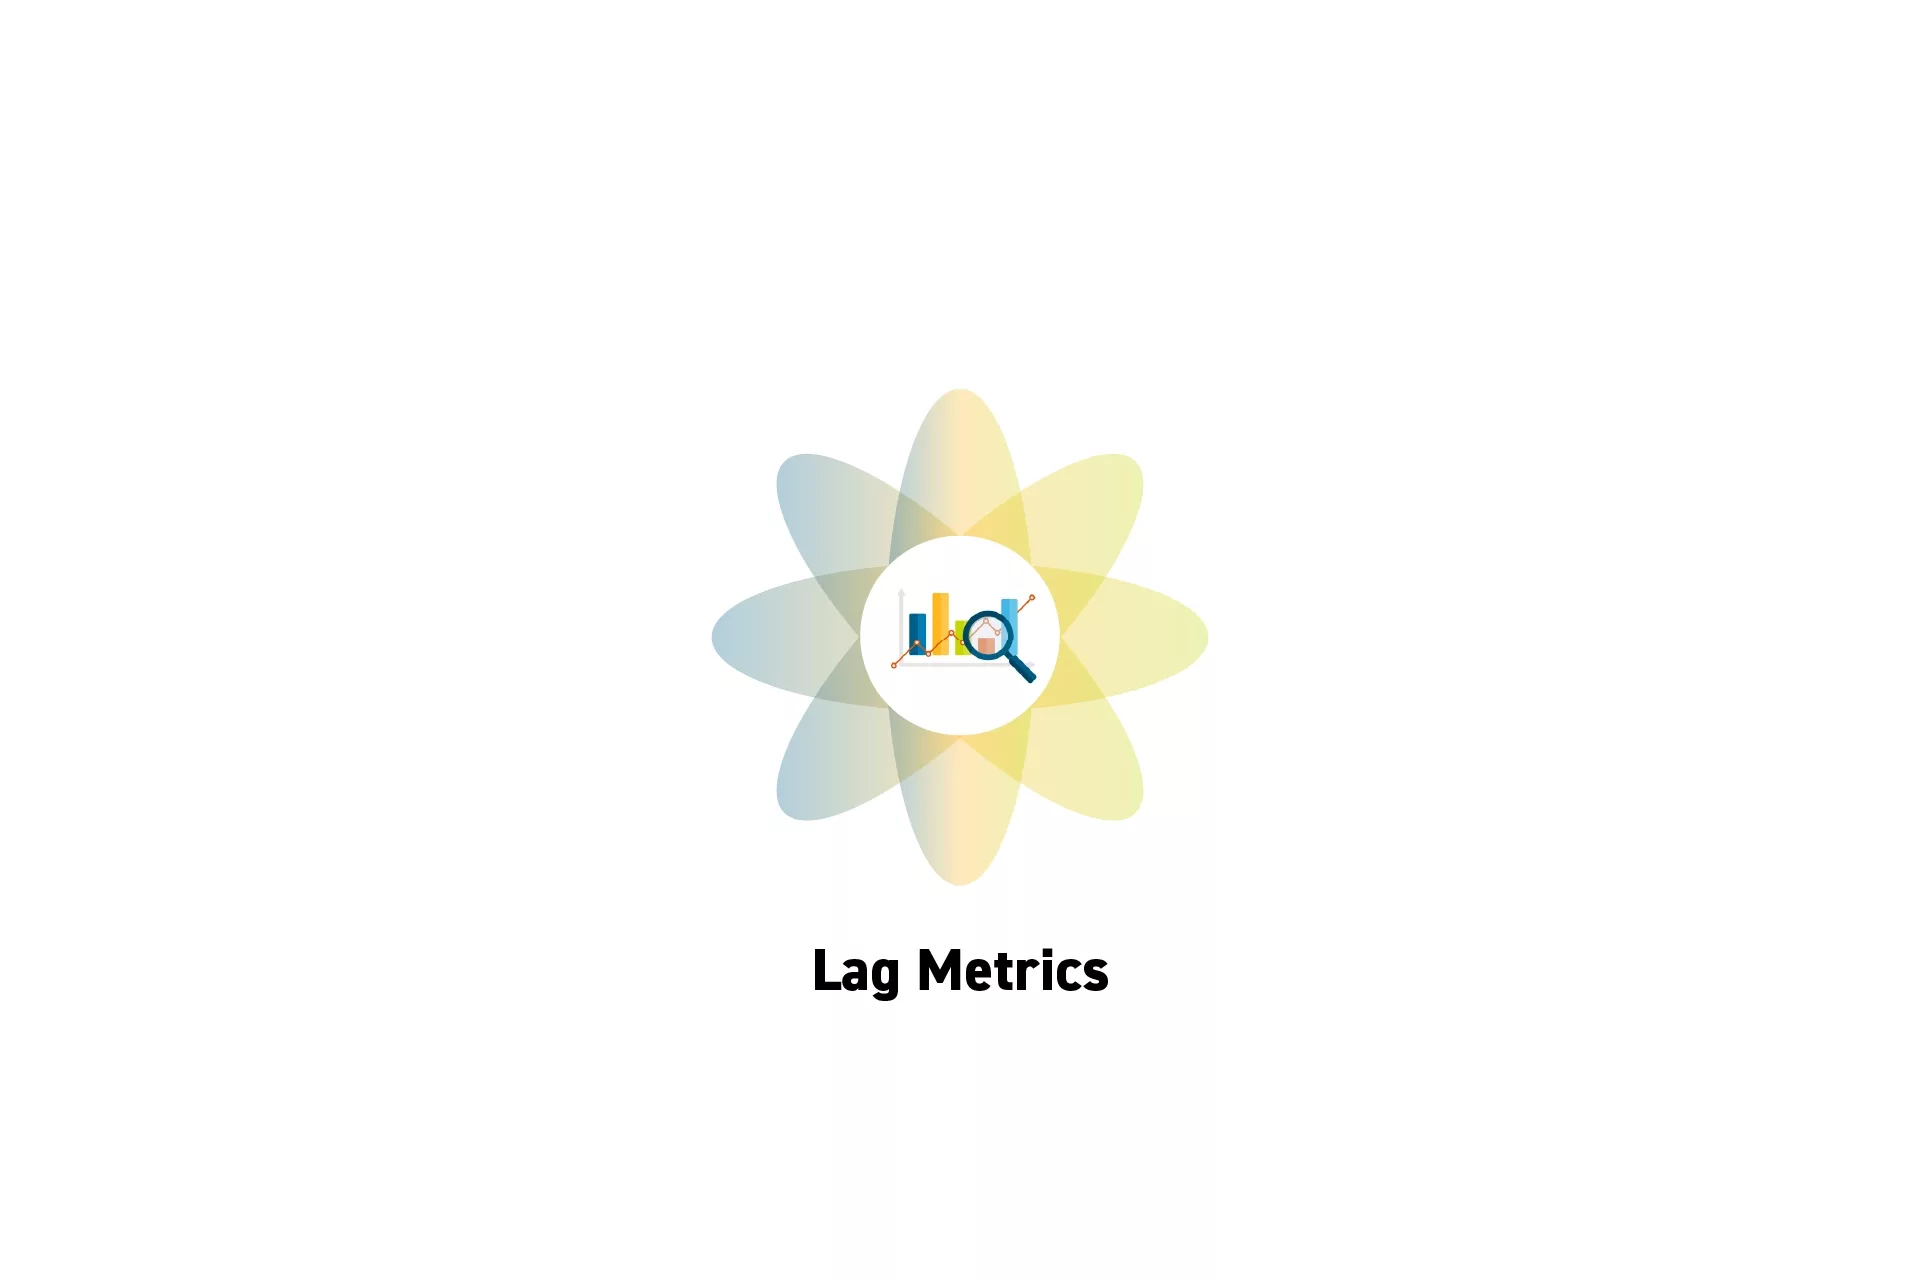 A flower that represents Analytics with the text “Lag Metrics” beneath it.